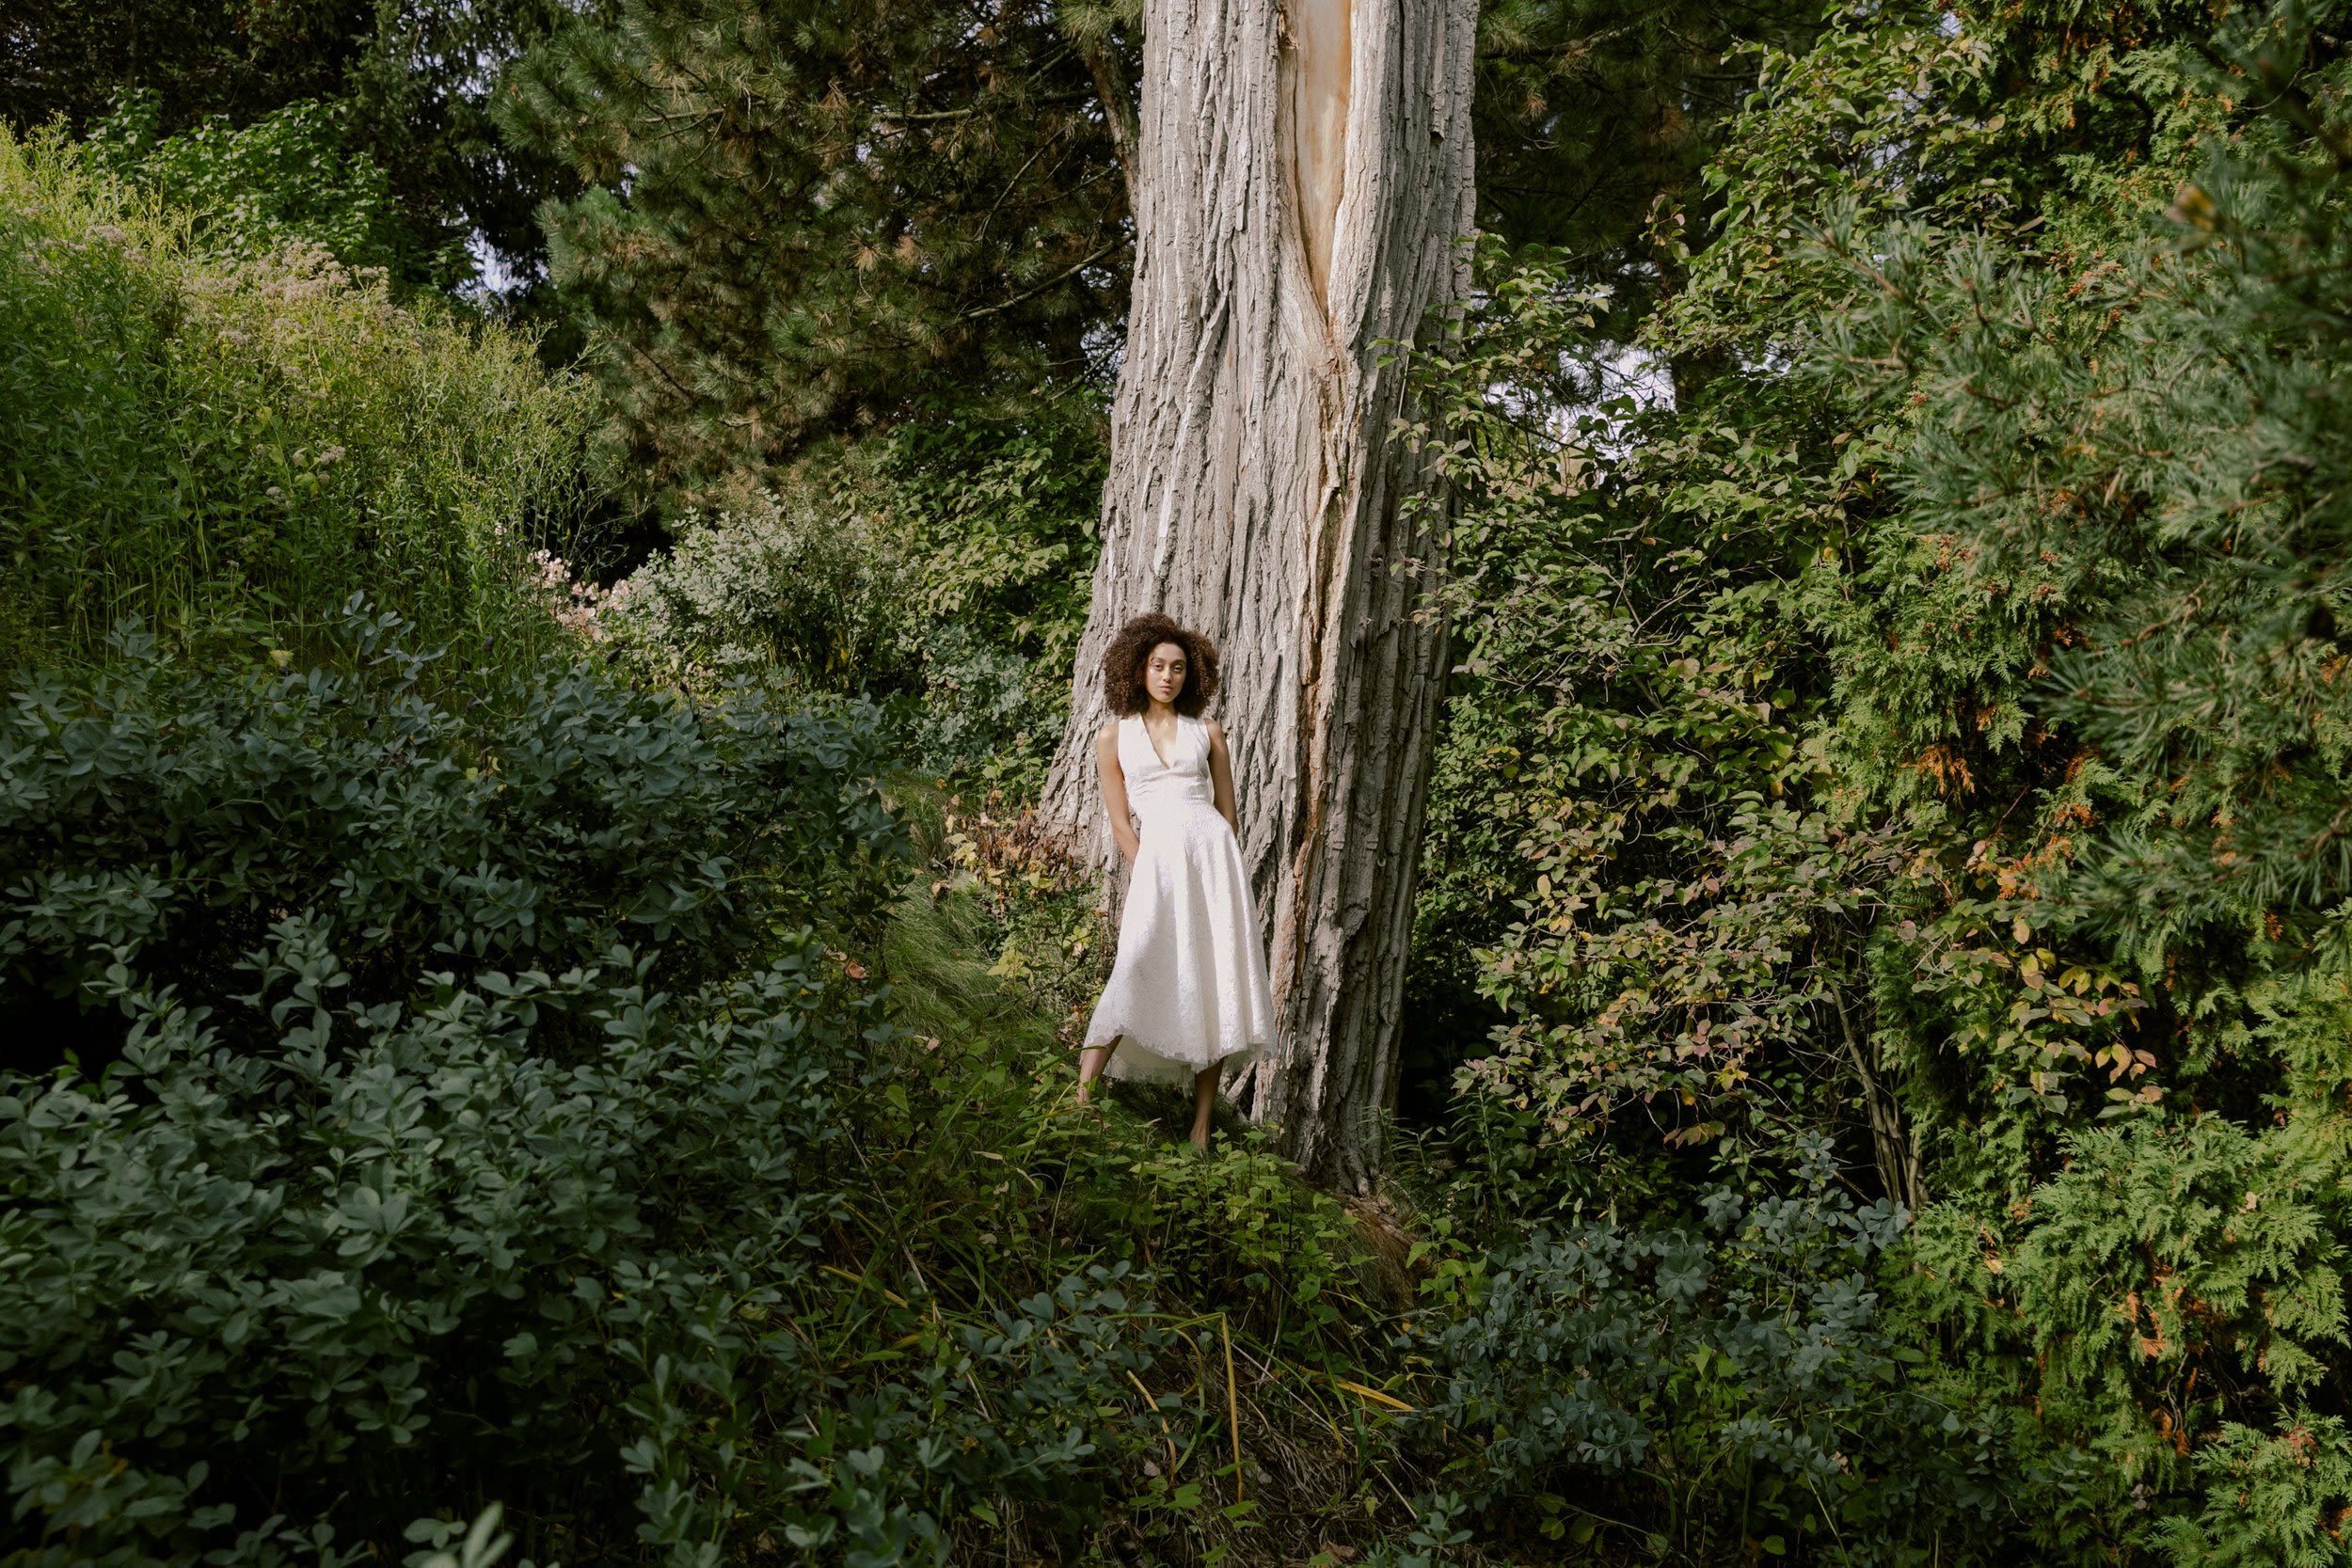 A young woman in a white dress stands in front of a tree in the woods